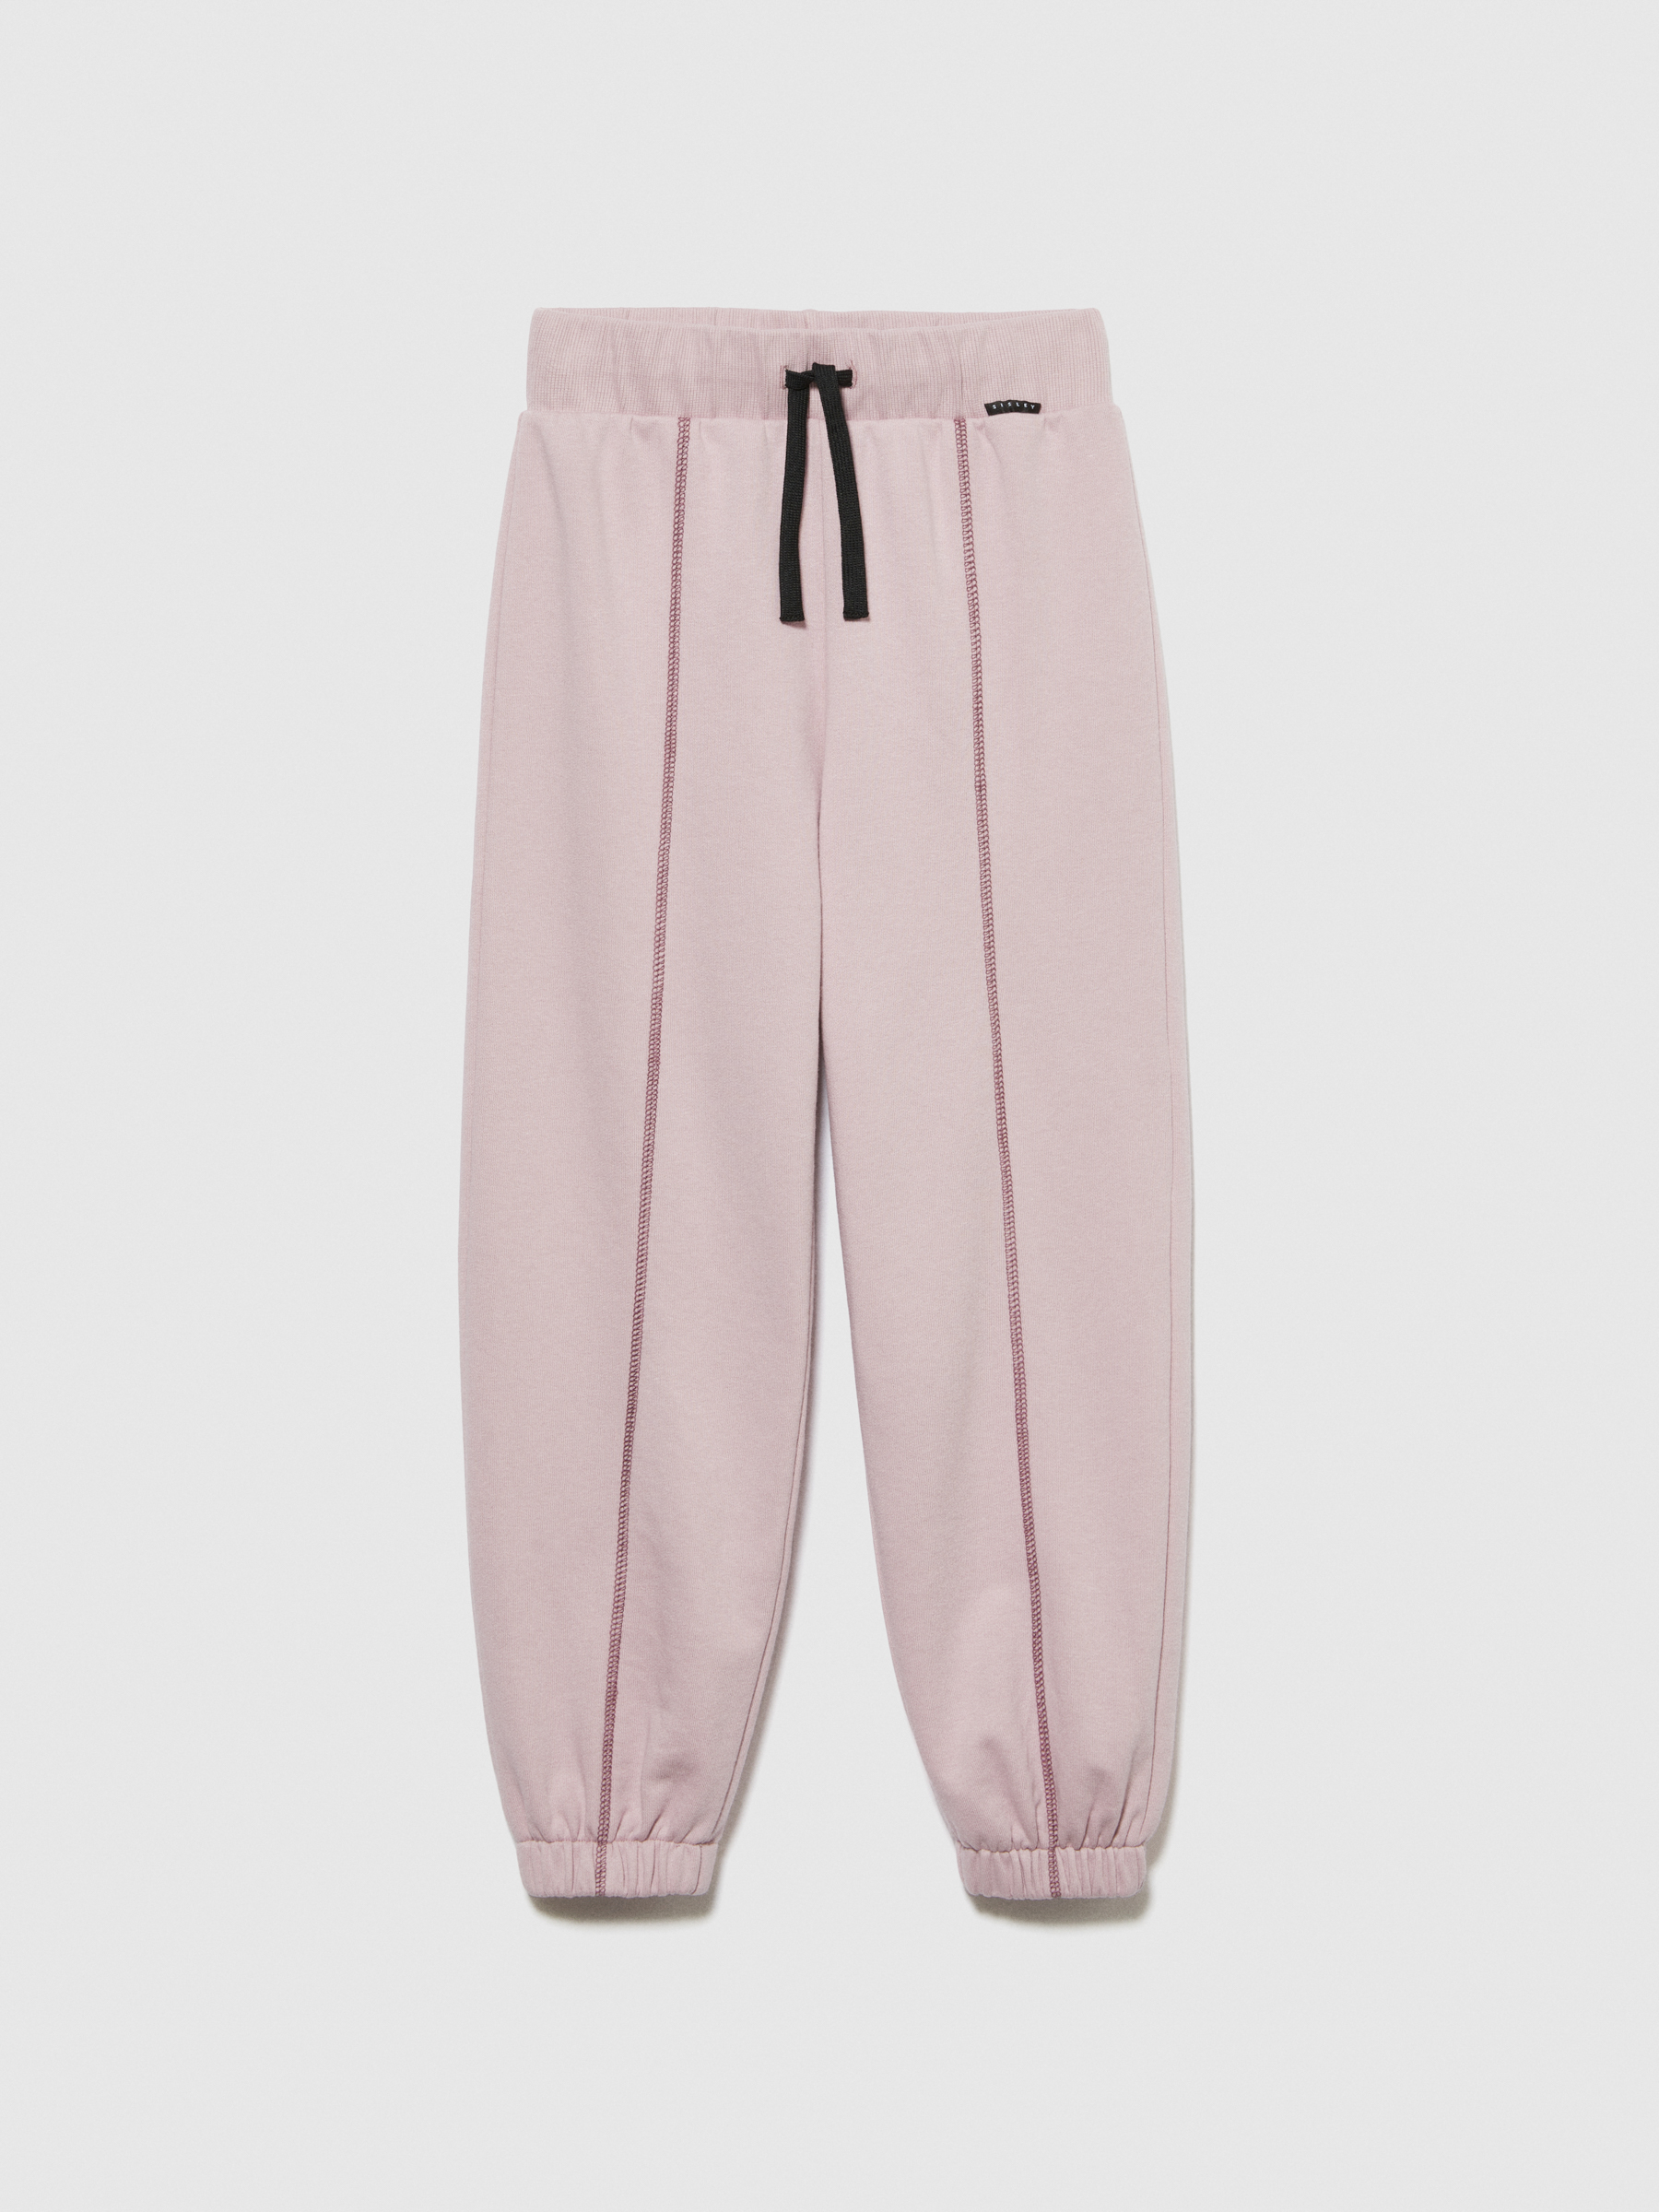 Sisley Young - Oversized Fit Joggers, Woman, Pink, Size: S